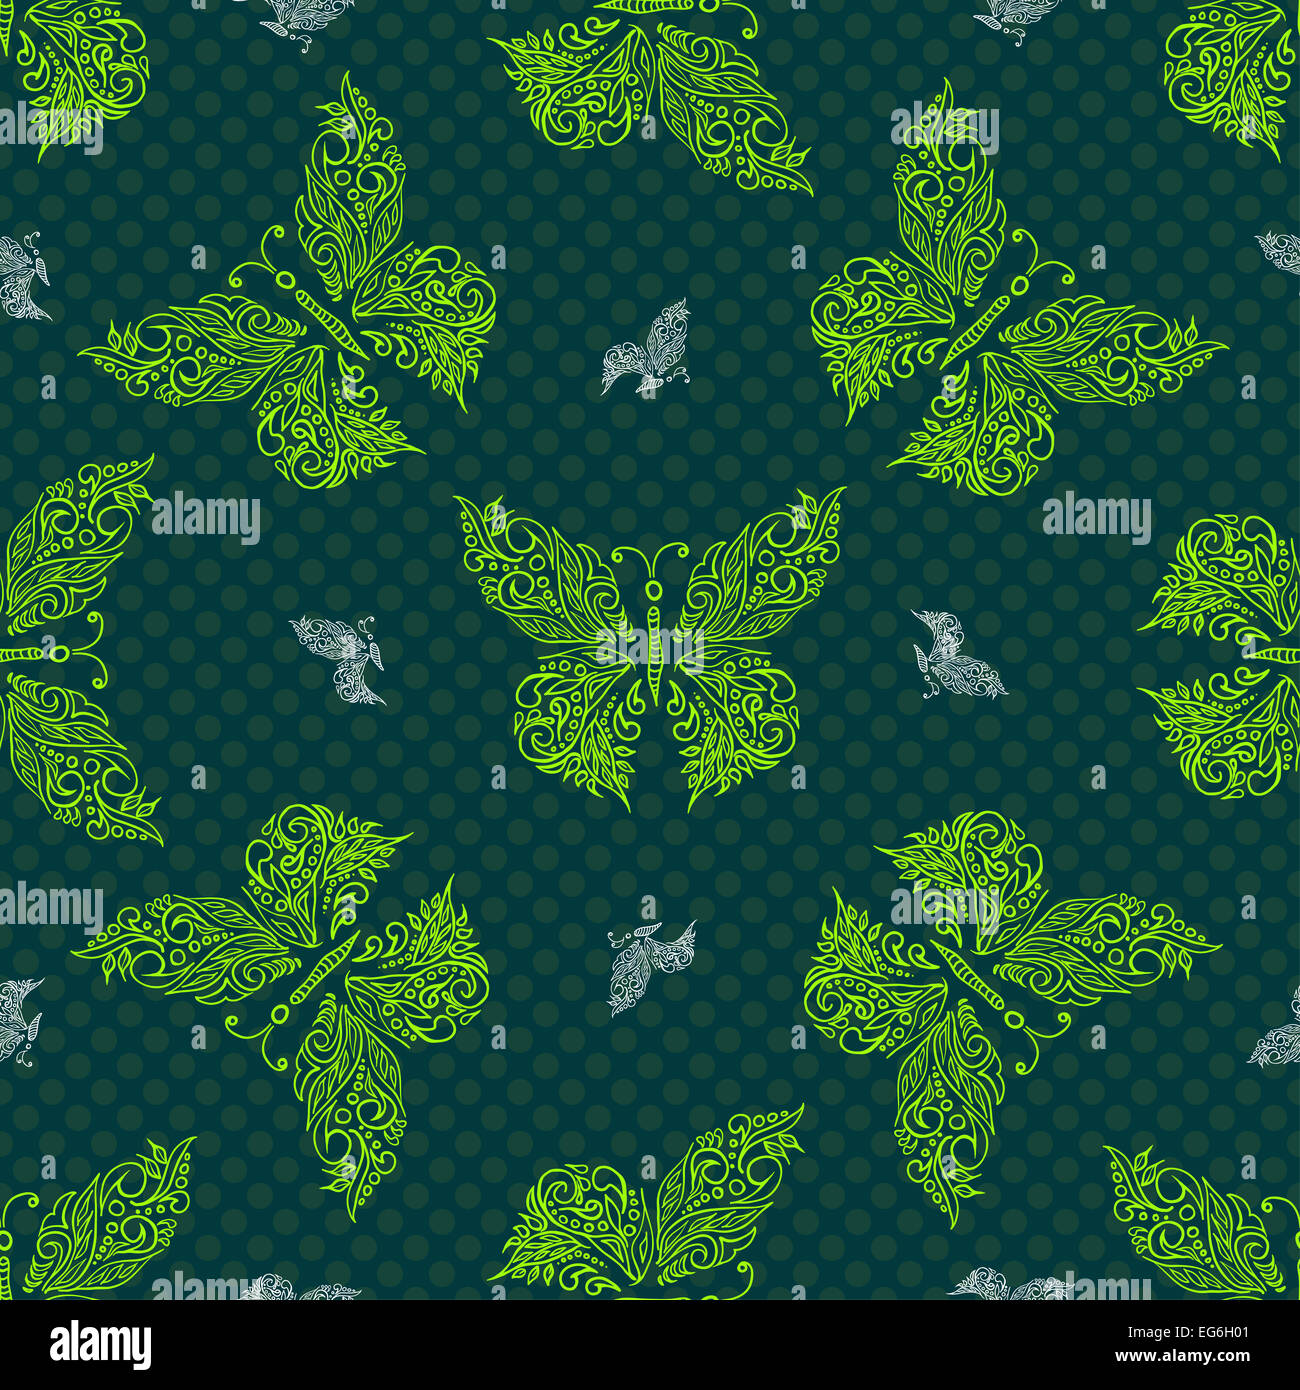 Seamless butterfly pattern. Vector illustration. Best for textile, print, web banner Stock Photo